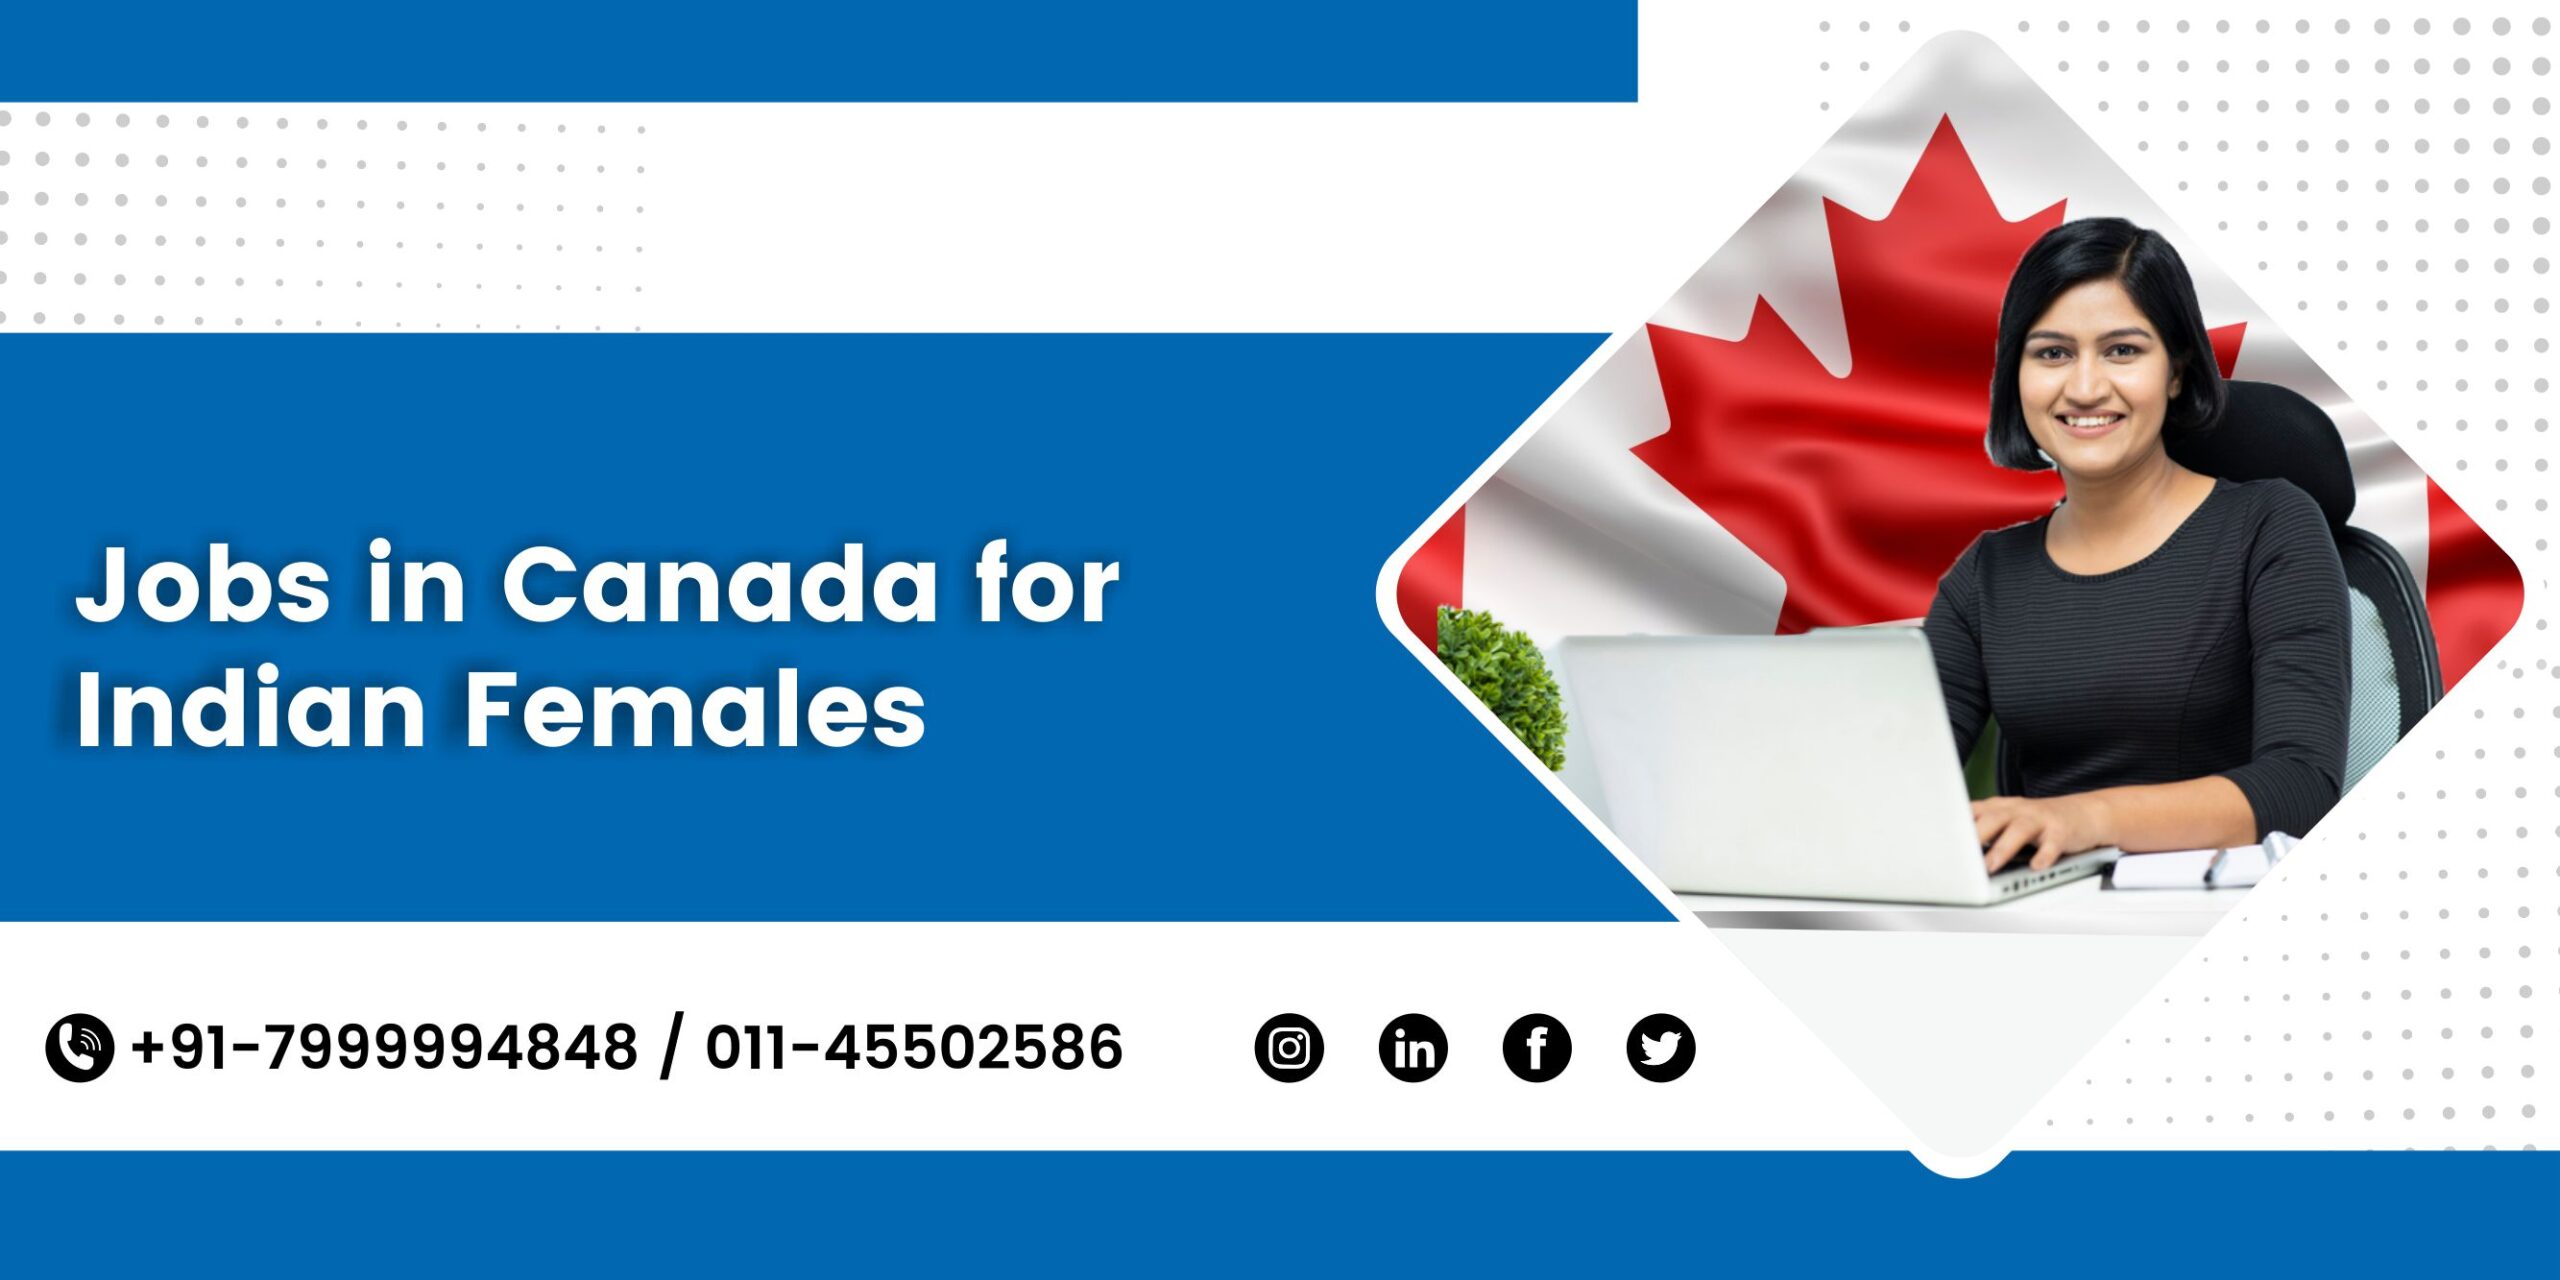 Jobs in canada for Indian females